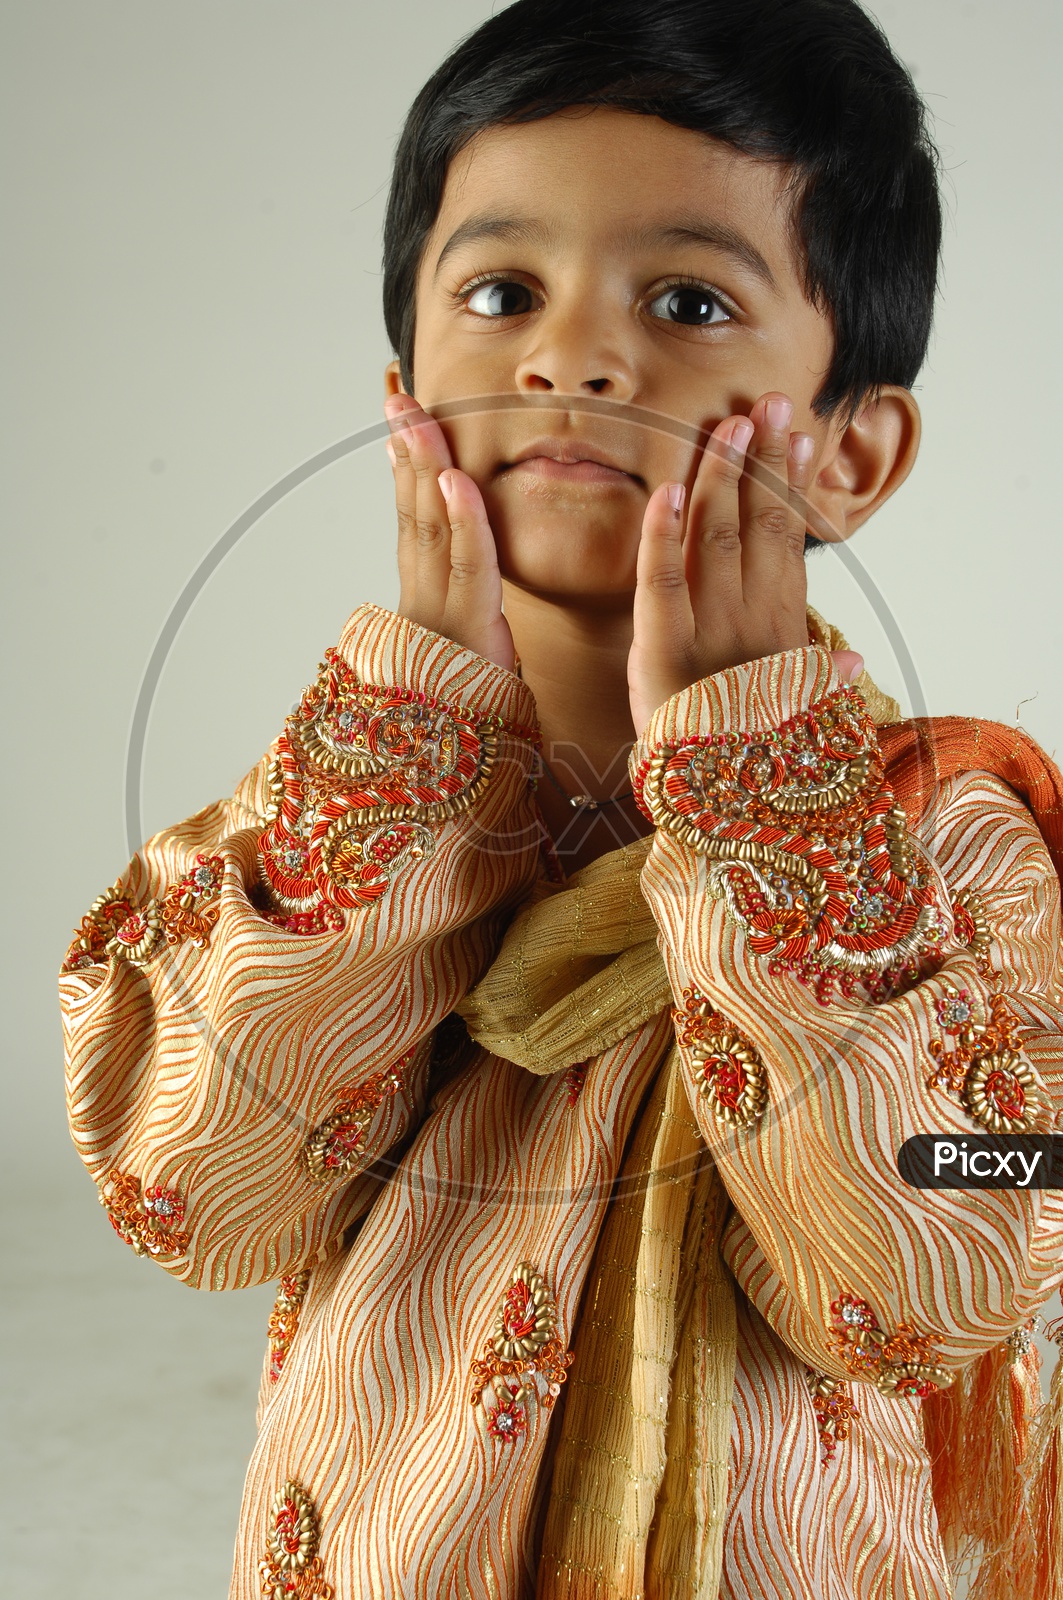 Indian Boy in Traditional Clothes With a Smiling Face   Over an Isolated White Background